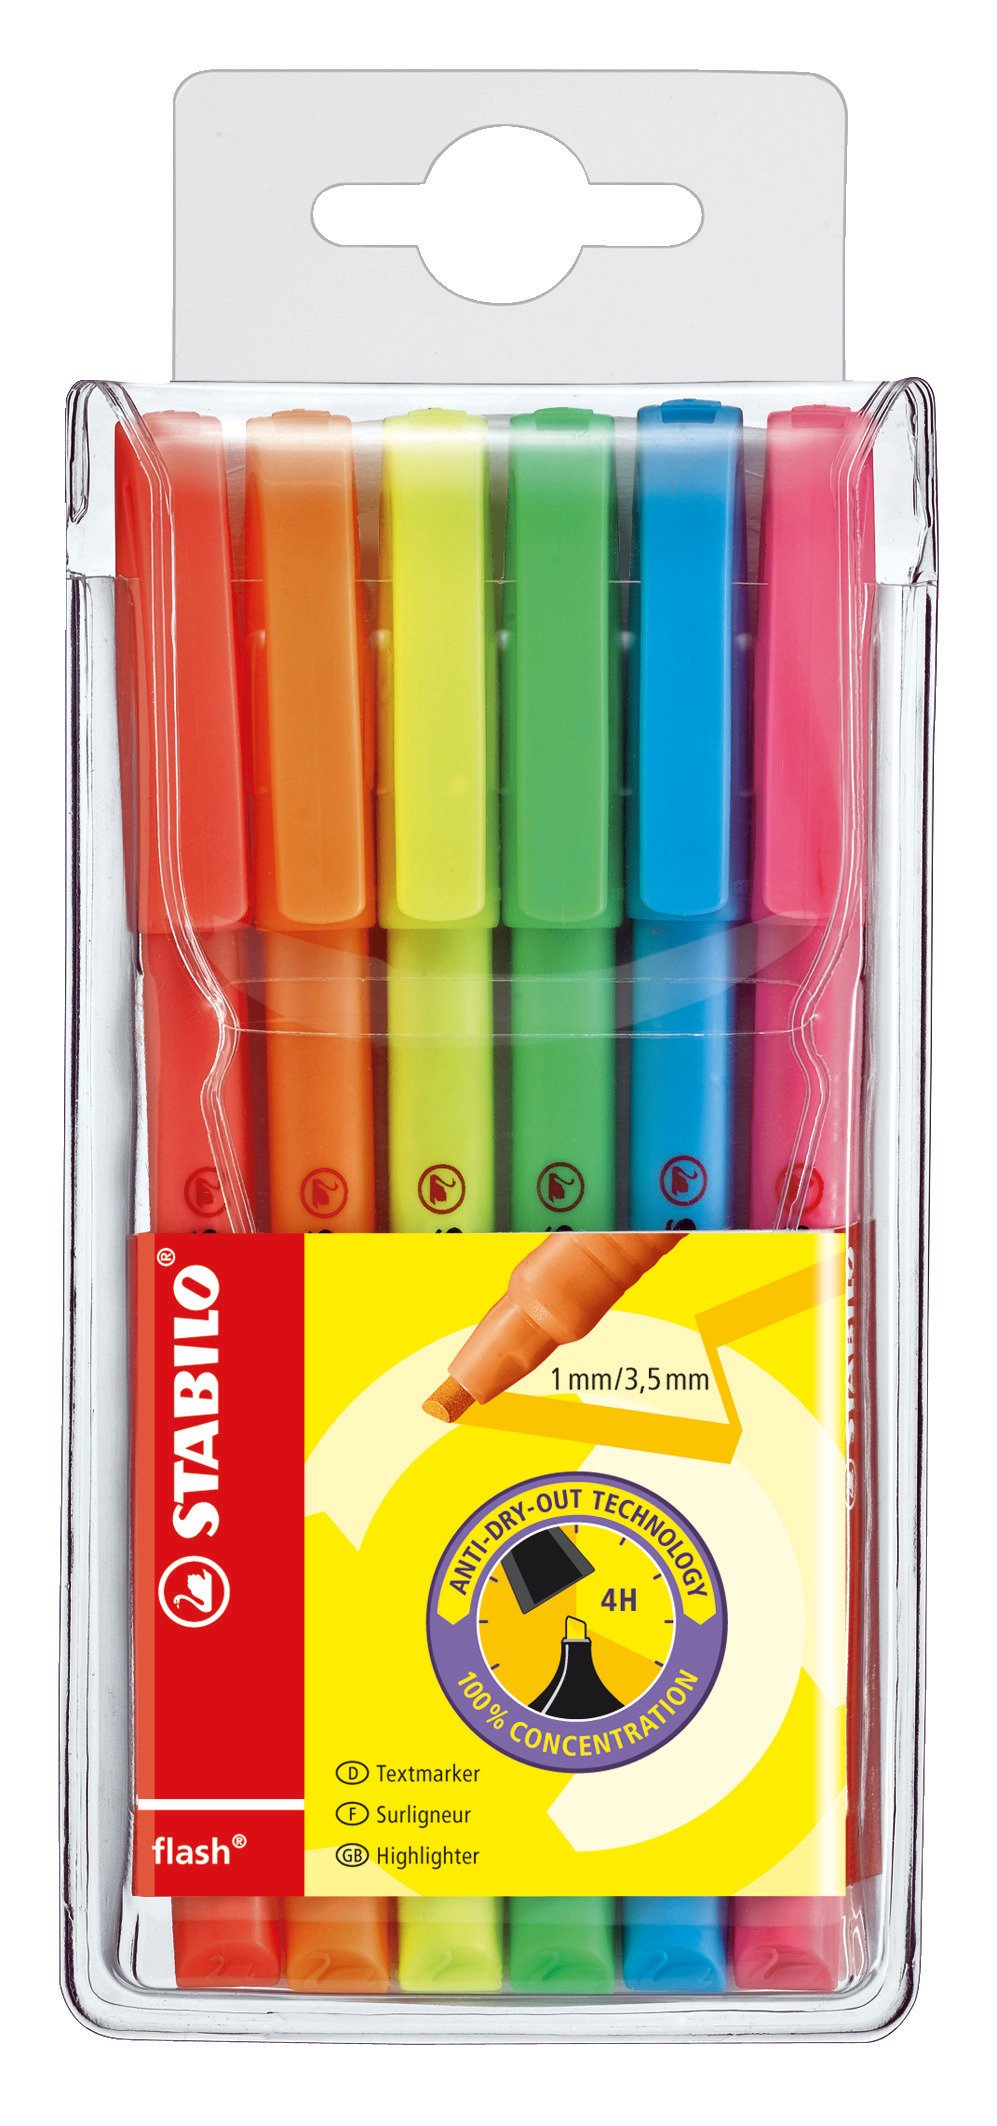 Highlighter STABILO flash - pack of 6